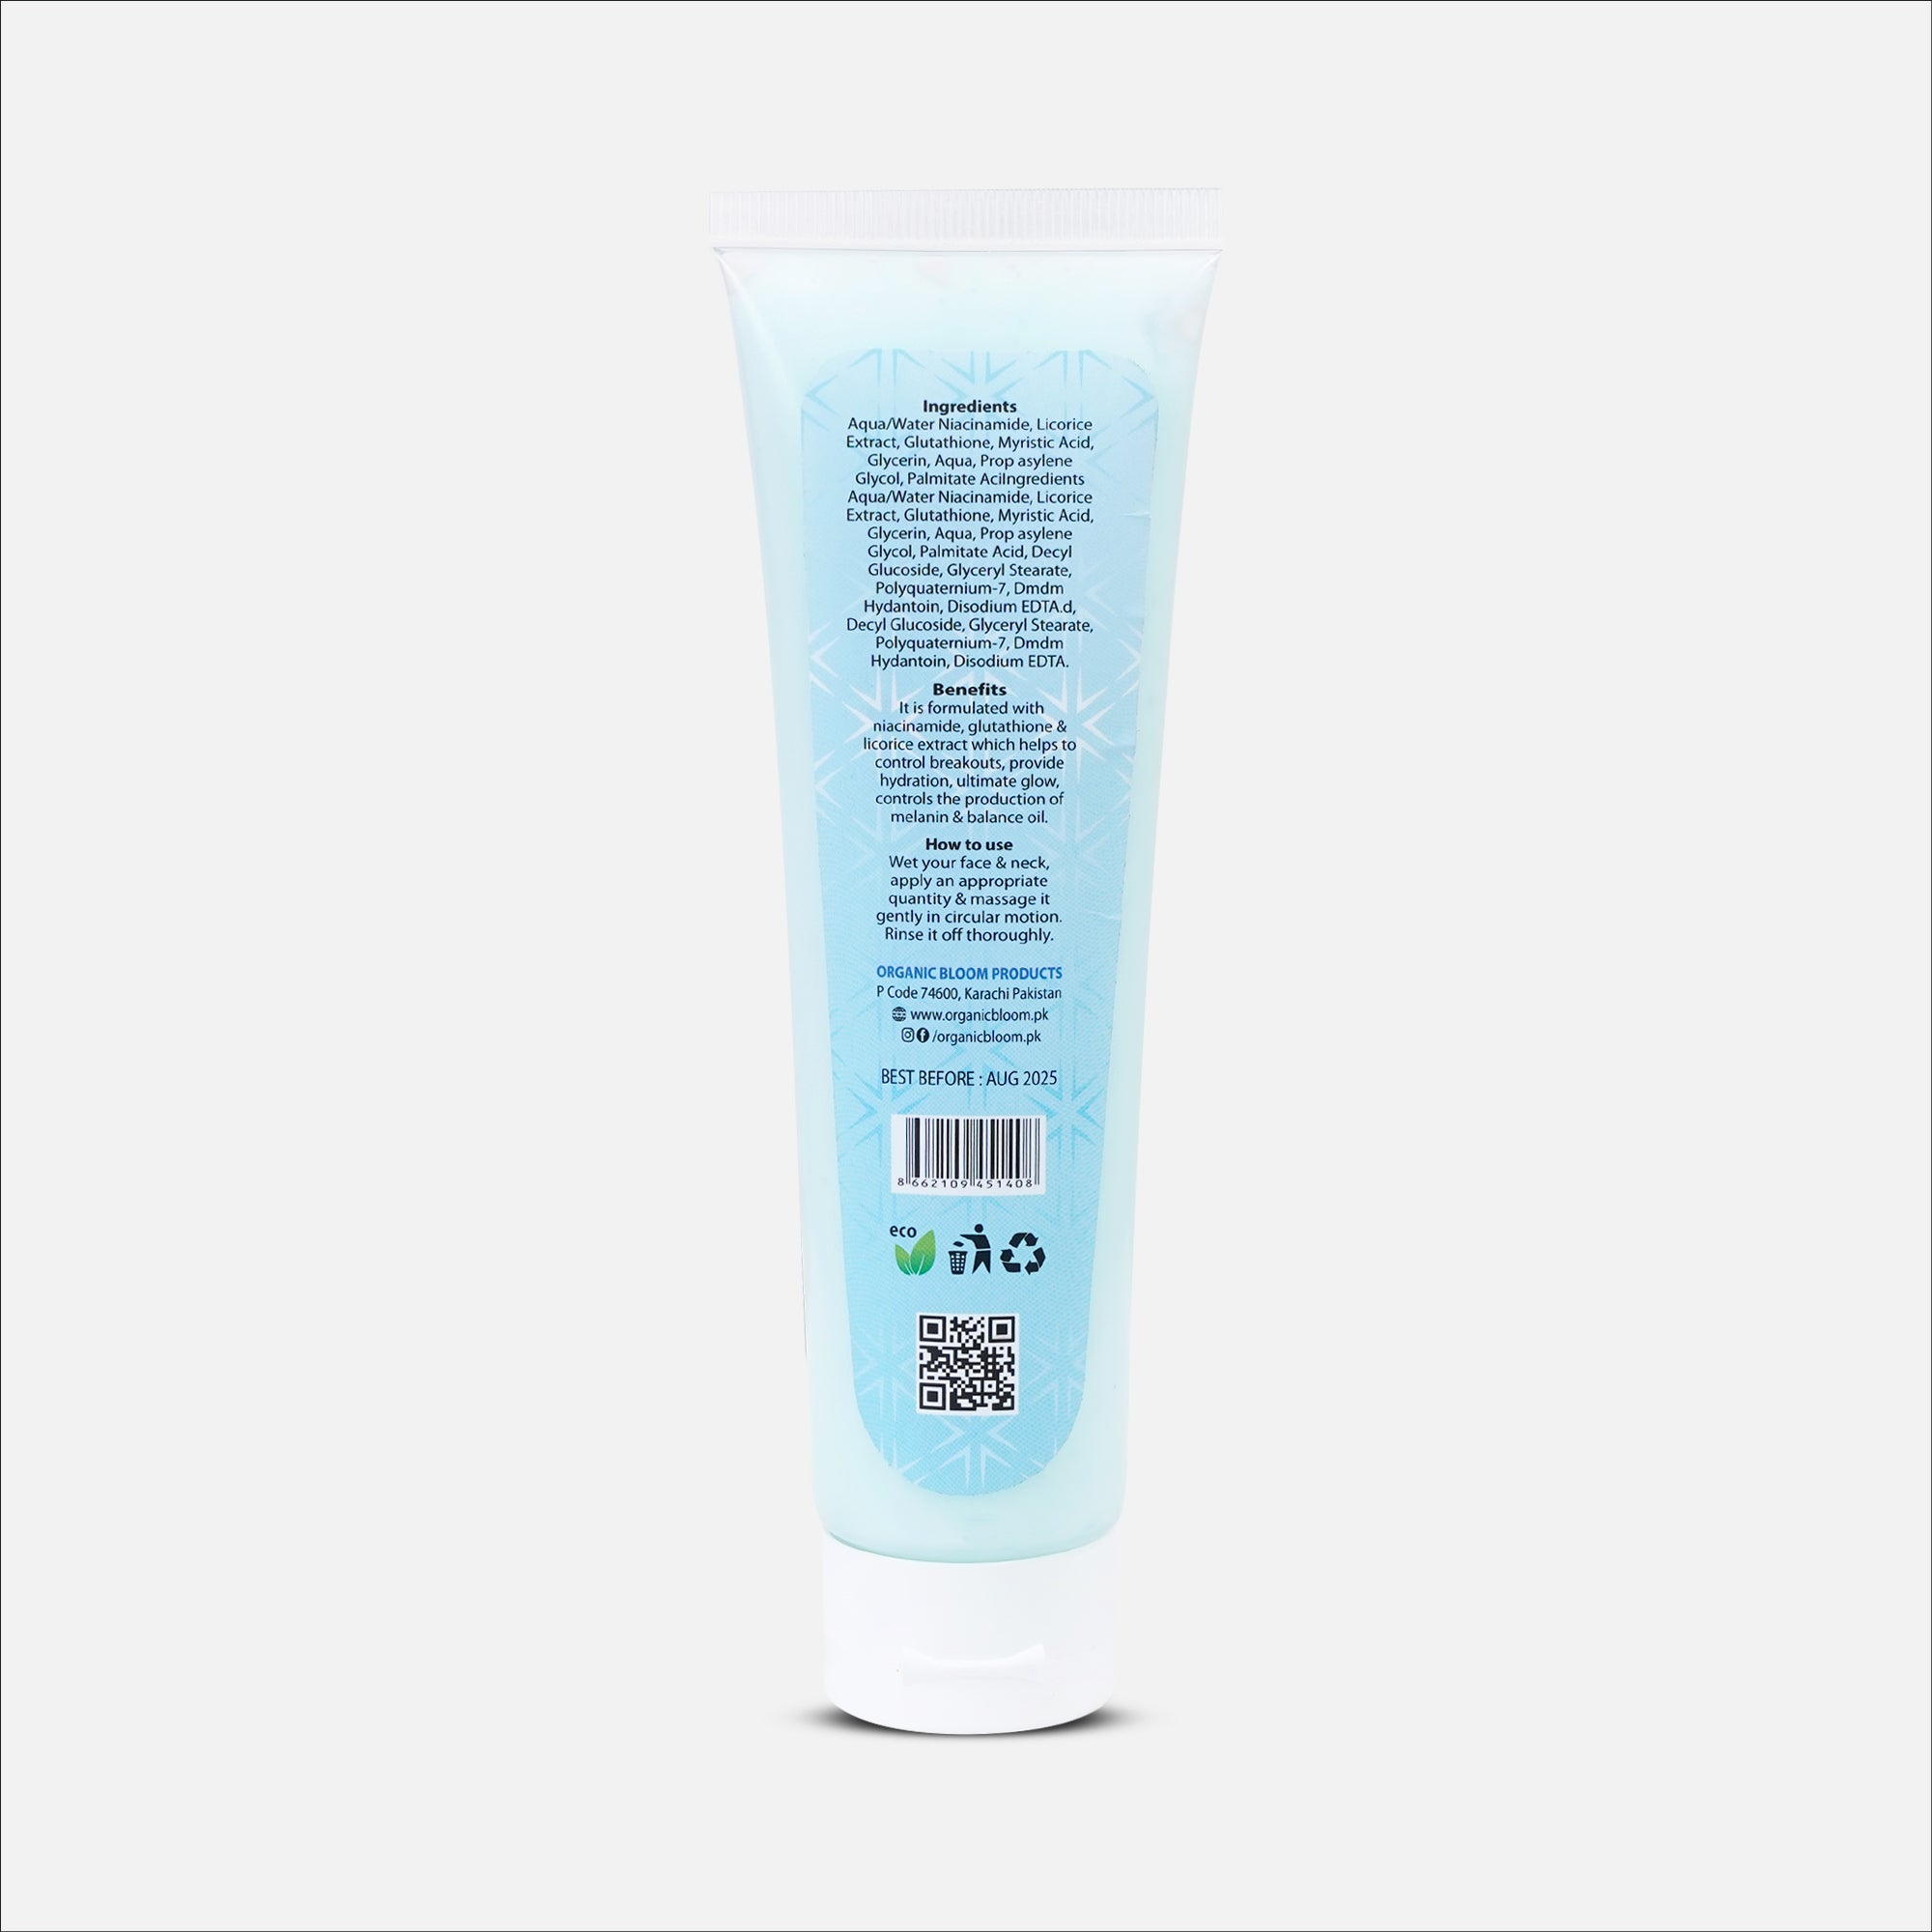 NIACINAMIDE LICORICE EXTRACT CREAMY FACE CLEANSER FOR ALL SKIN TYPES